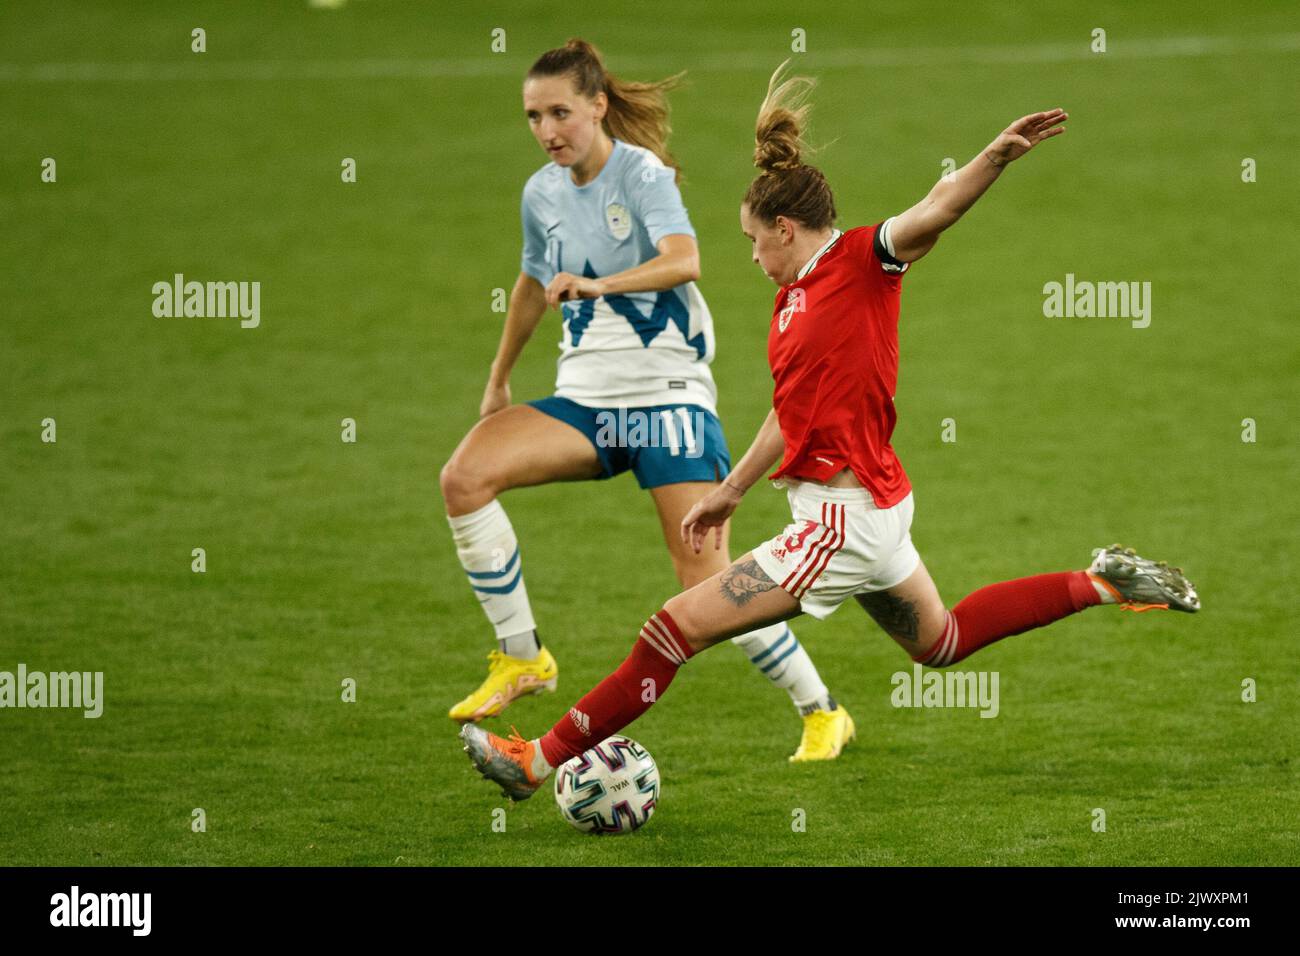 Cardiff, UK. 6th Sep, 2022. Gemma Evans of Wales shoots during the Wales v Slovenia Women's World Cup Qualification match. Credit: Gruffydd Thomas/Alamy Live News Stock Photo